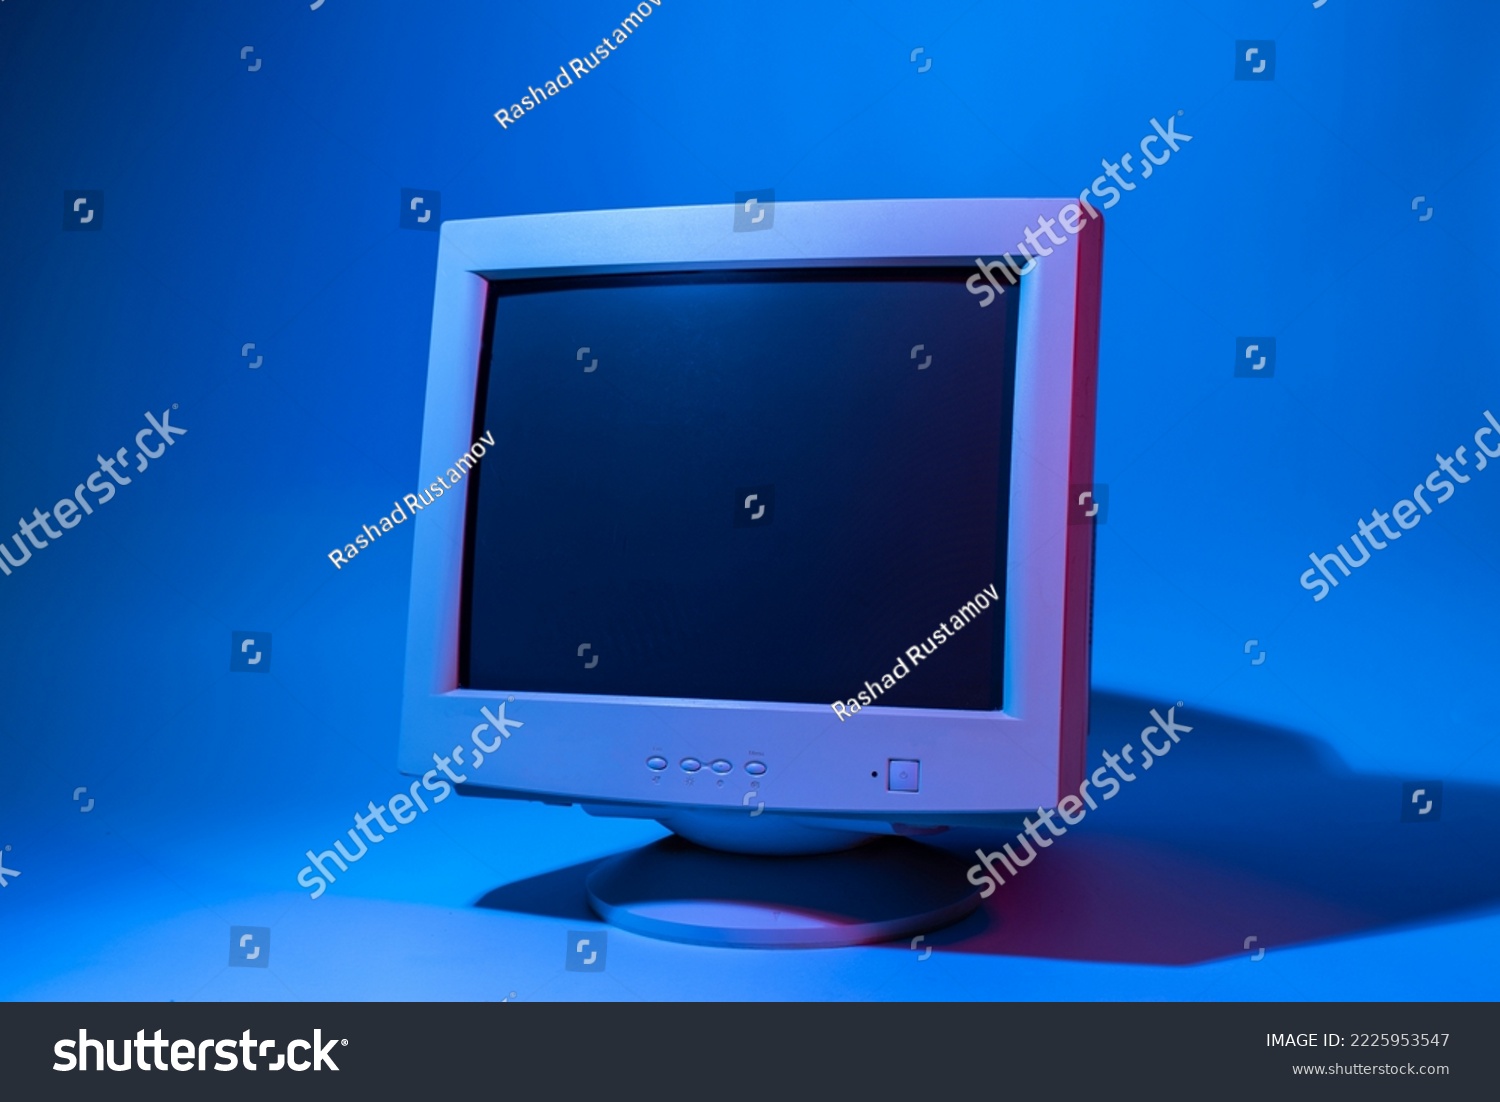 Retro computer and technology with monitor and hardware #2225953547